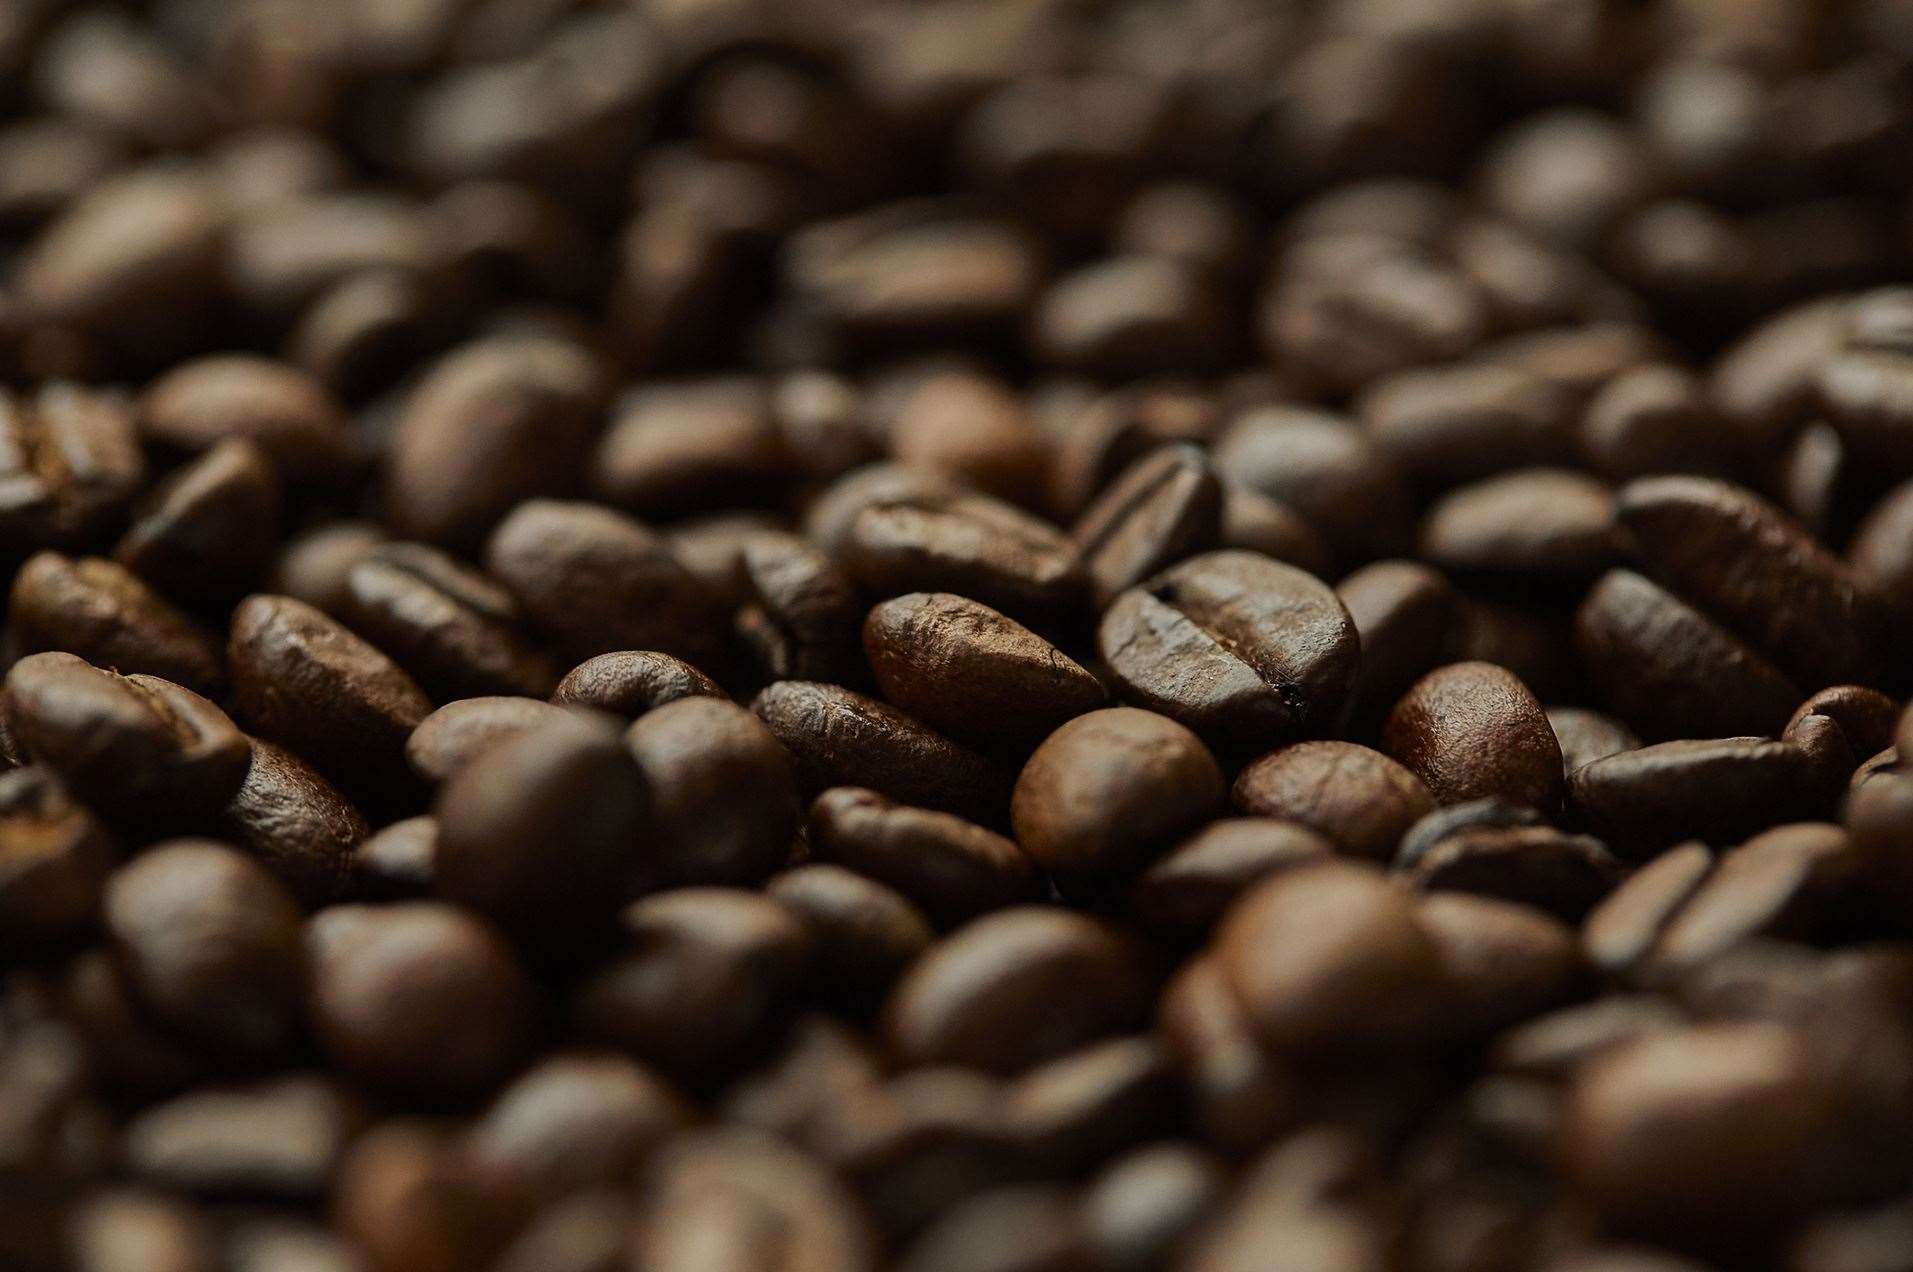 The survey conducted by the firm shows we're buying more independent coffee brands